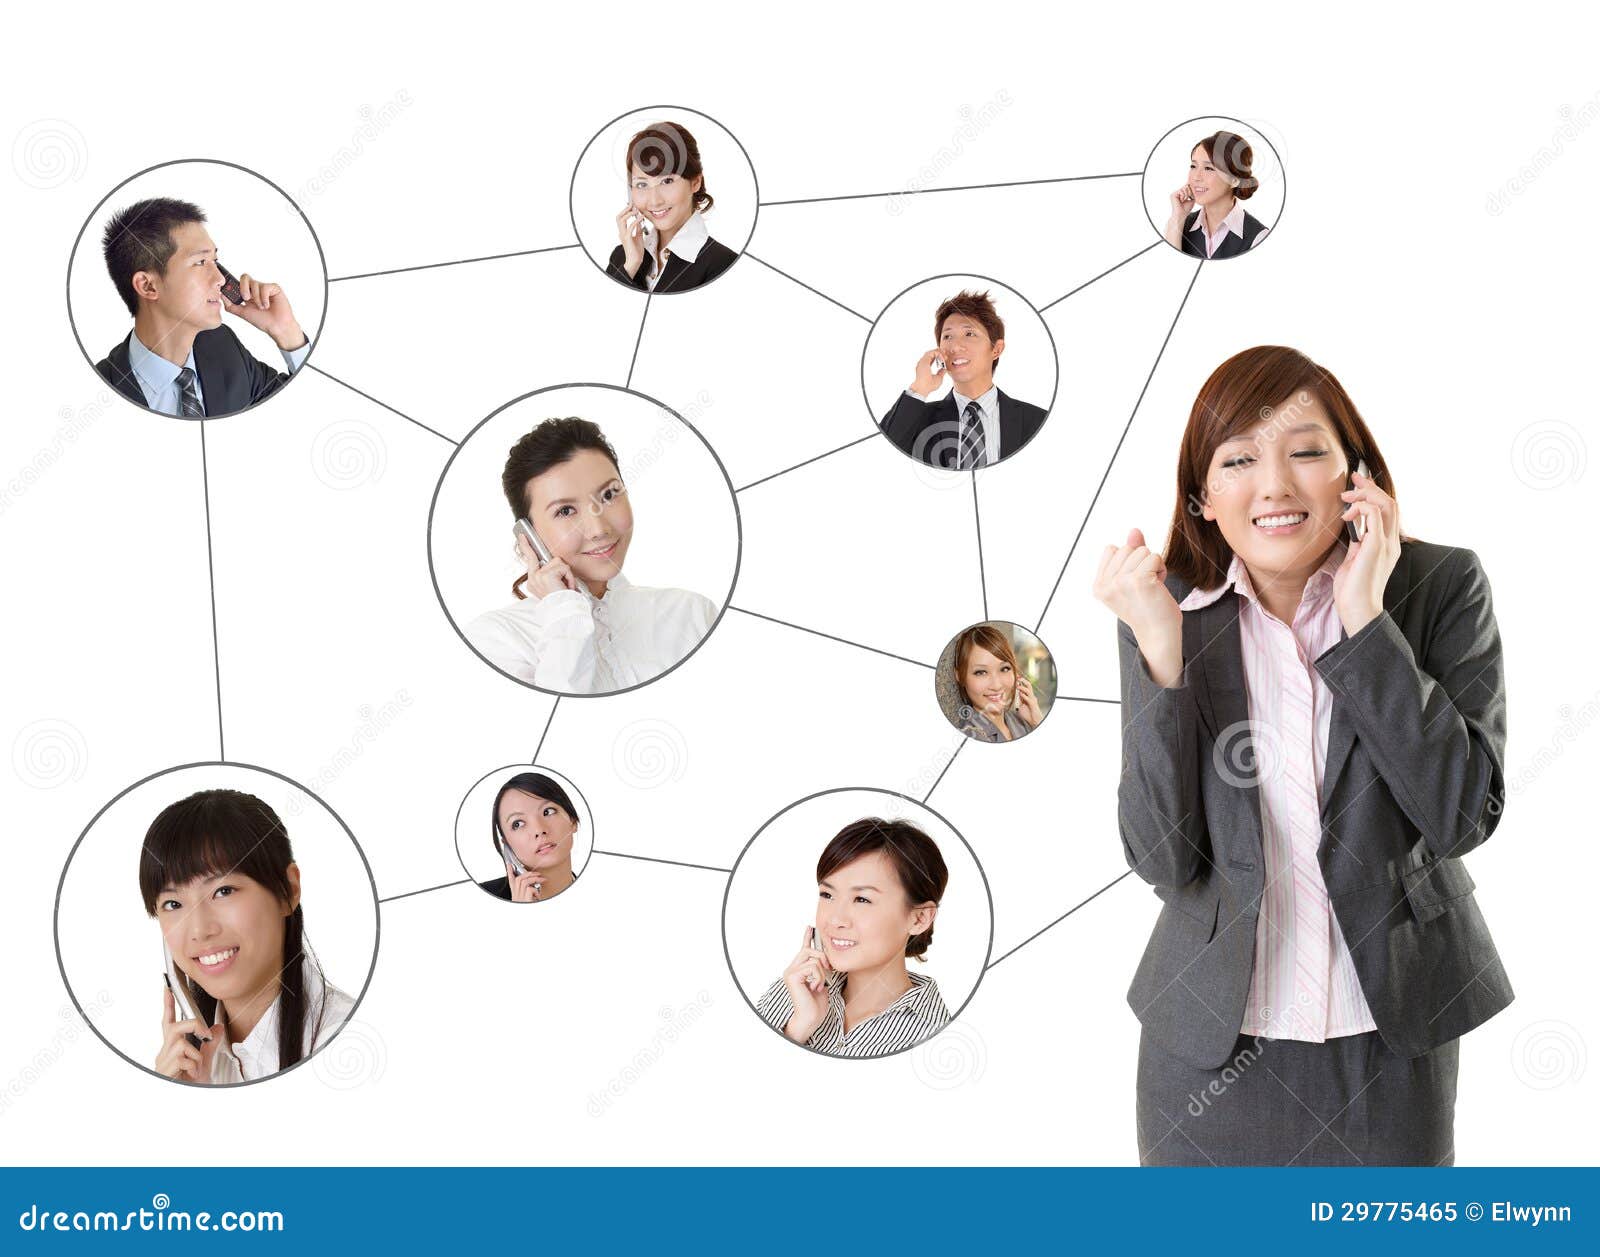 Asian Business Networking 116